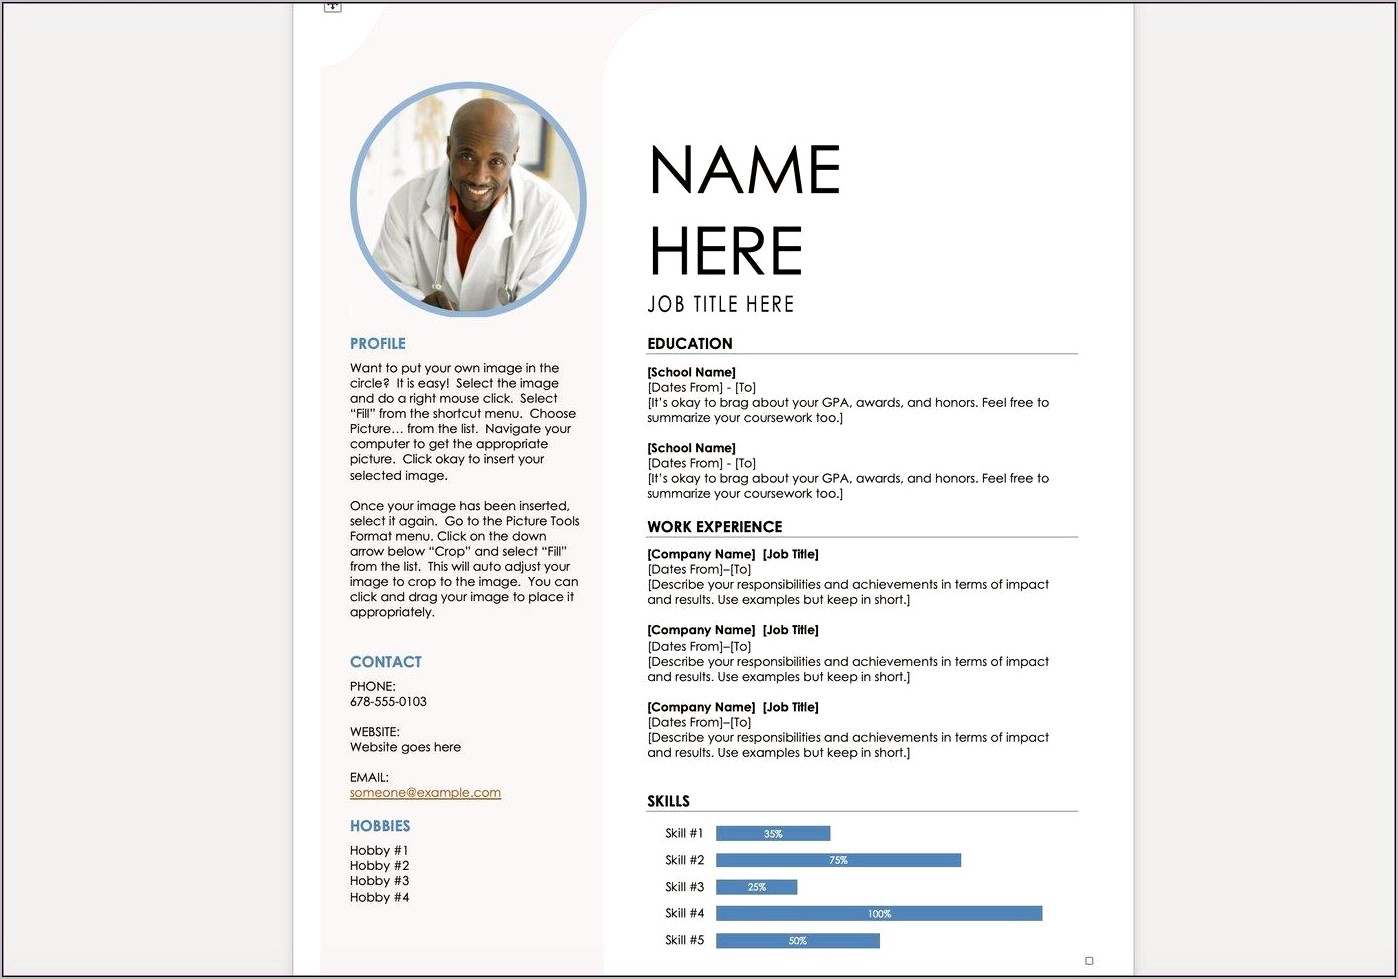 Best Micrissoft Theme To Use For A Resume